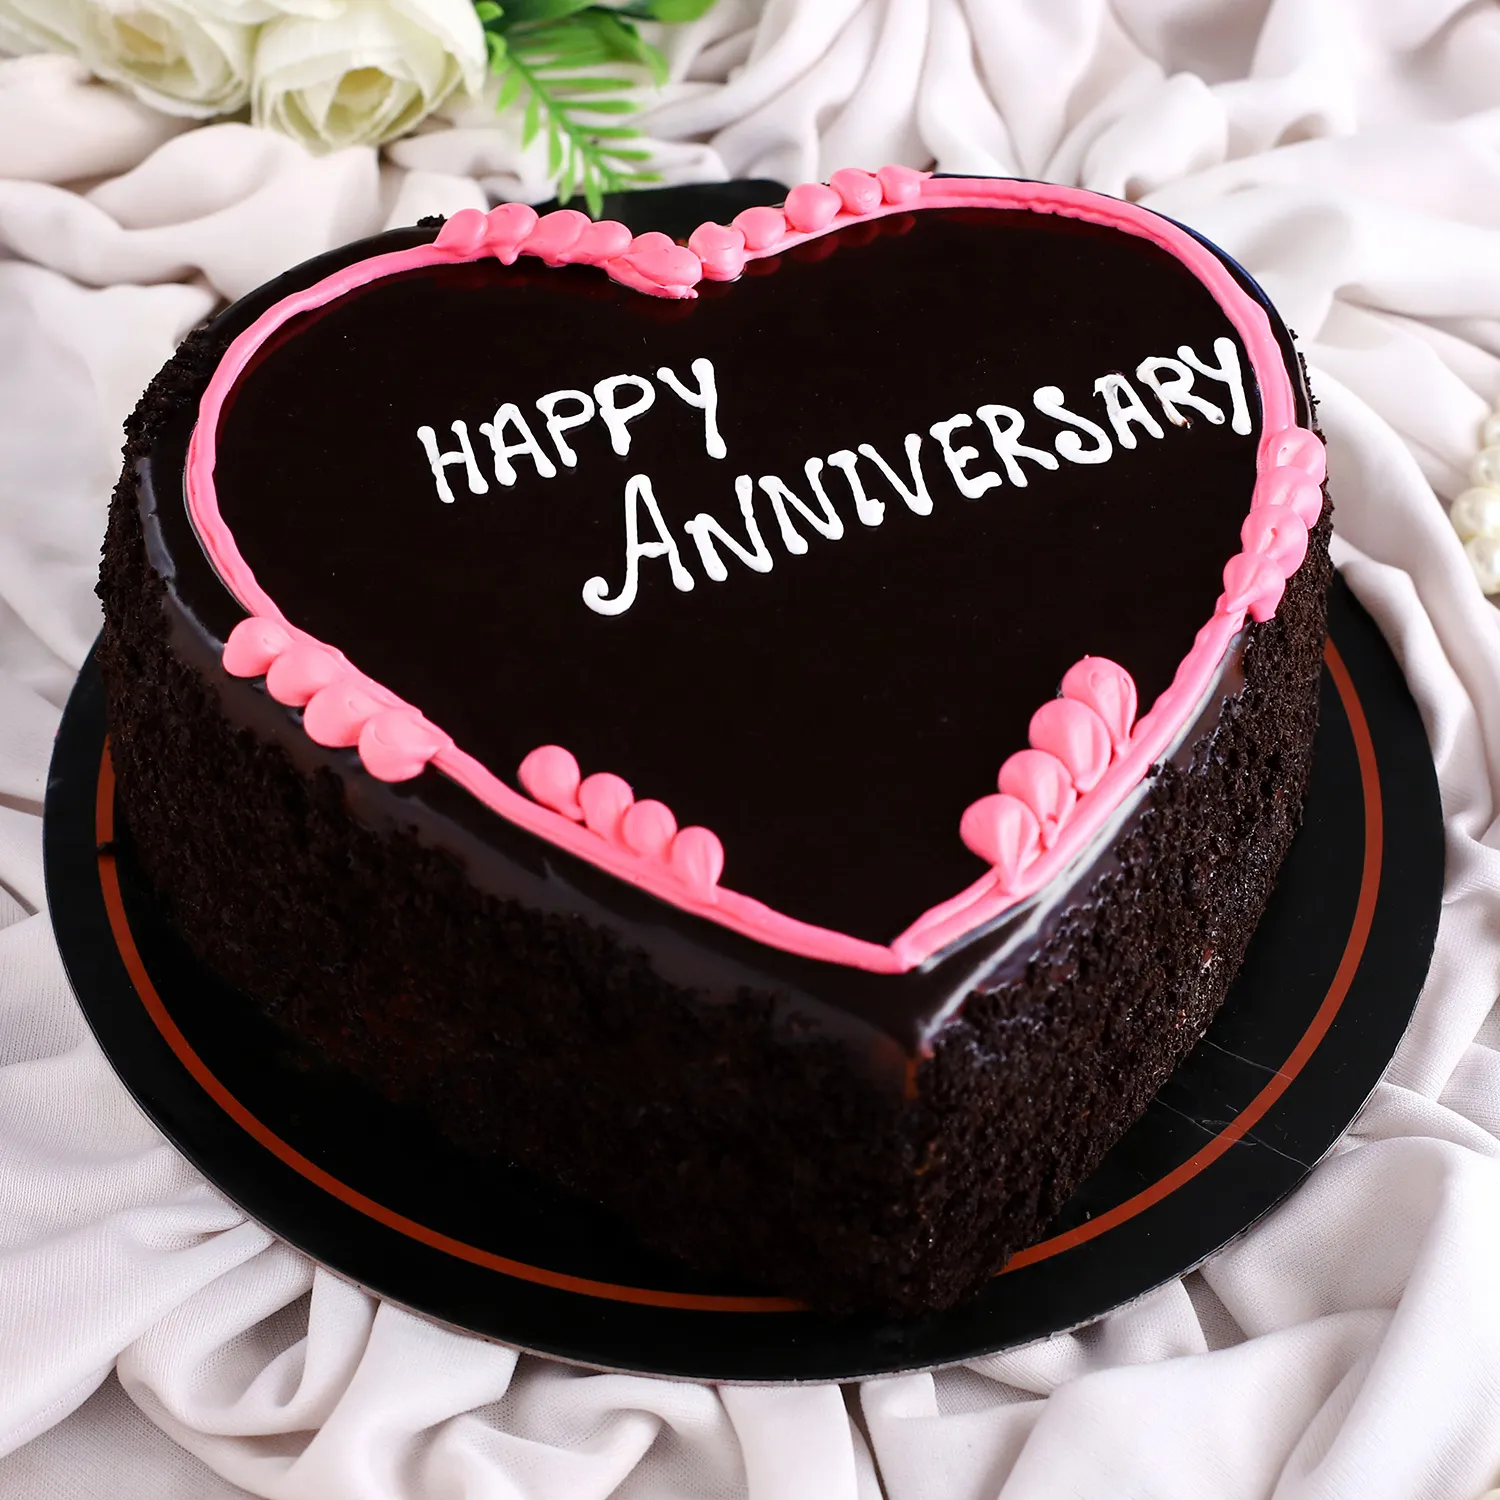 Happy marriage anniversary brother